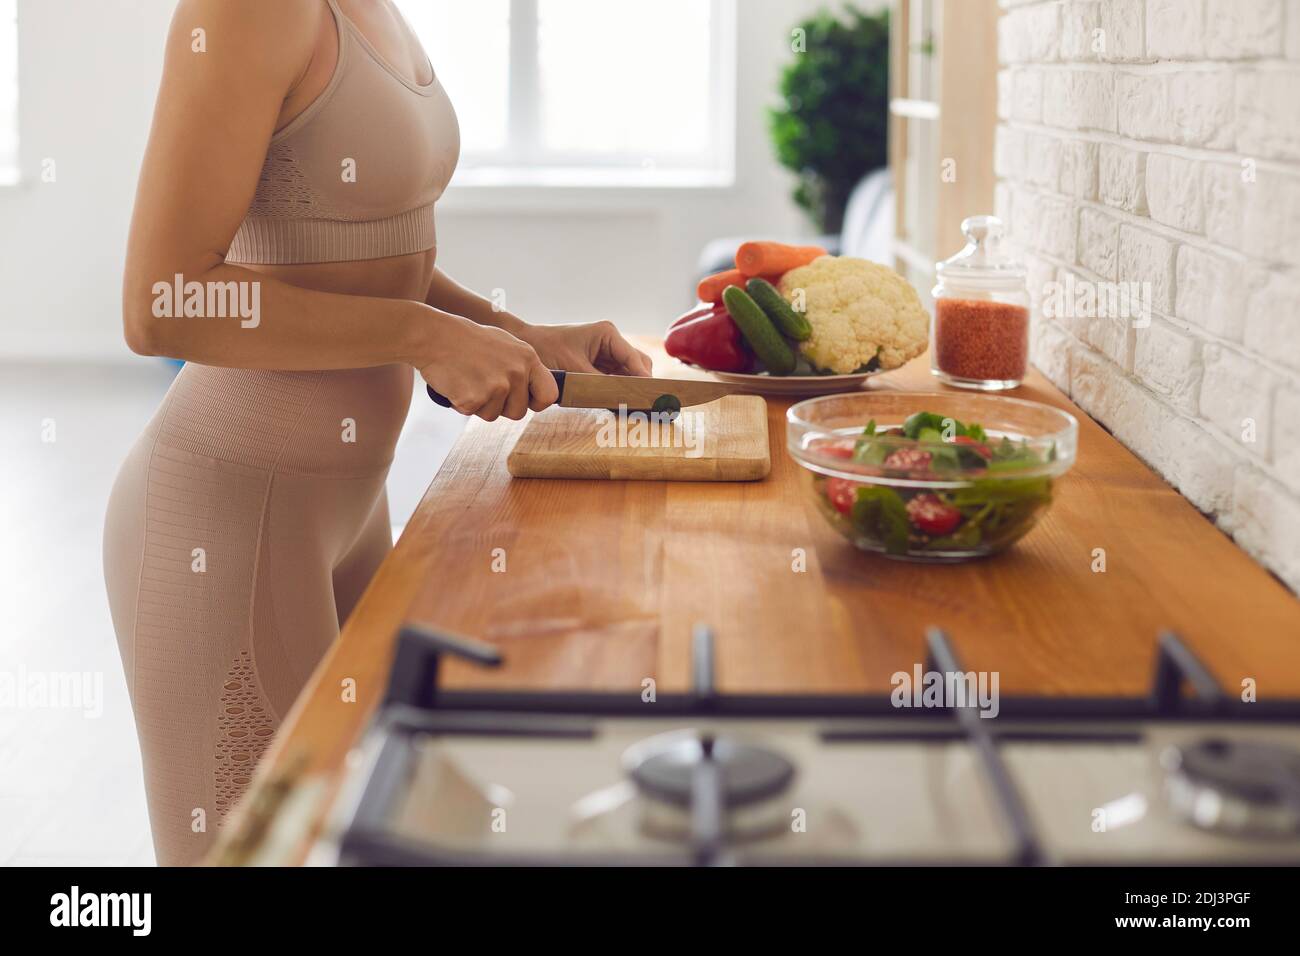 Unrecognizable fit woman standing at countertop and chopping vegetables for healthy salad Stock Photo